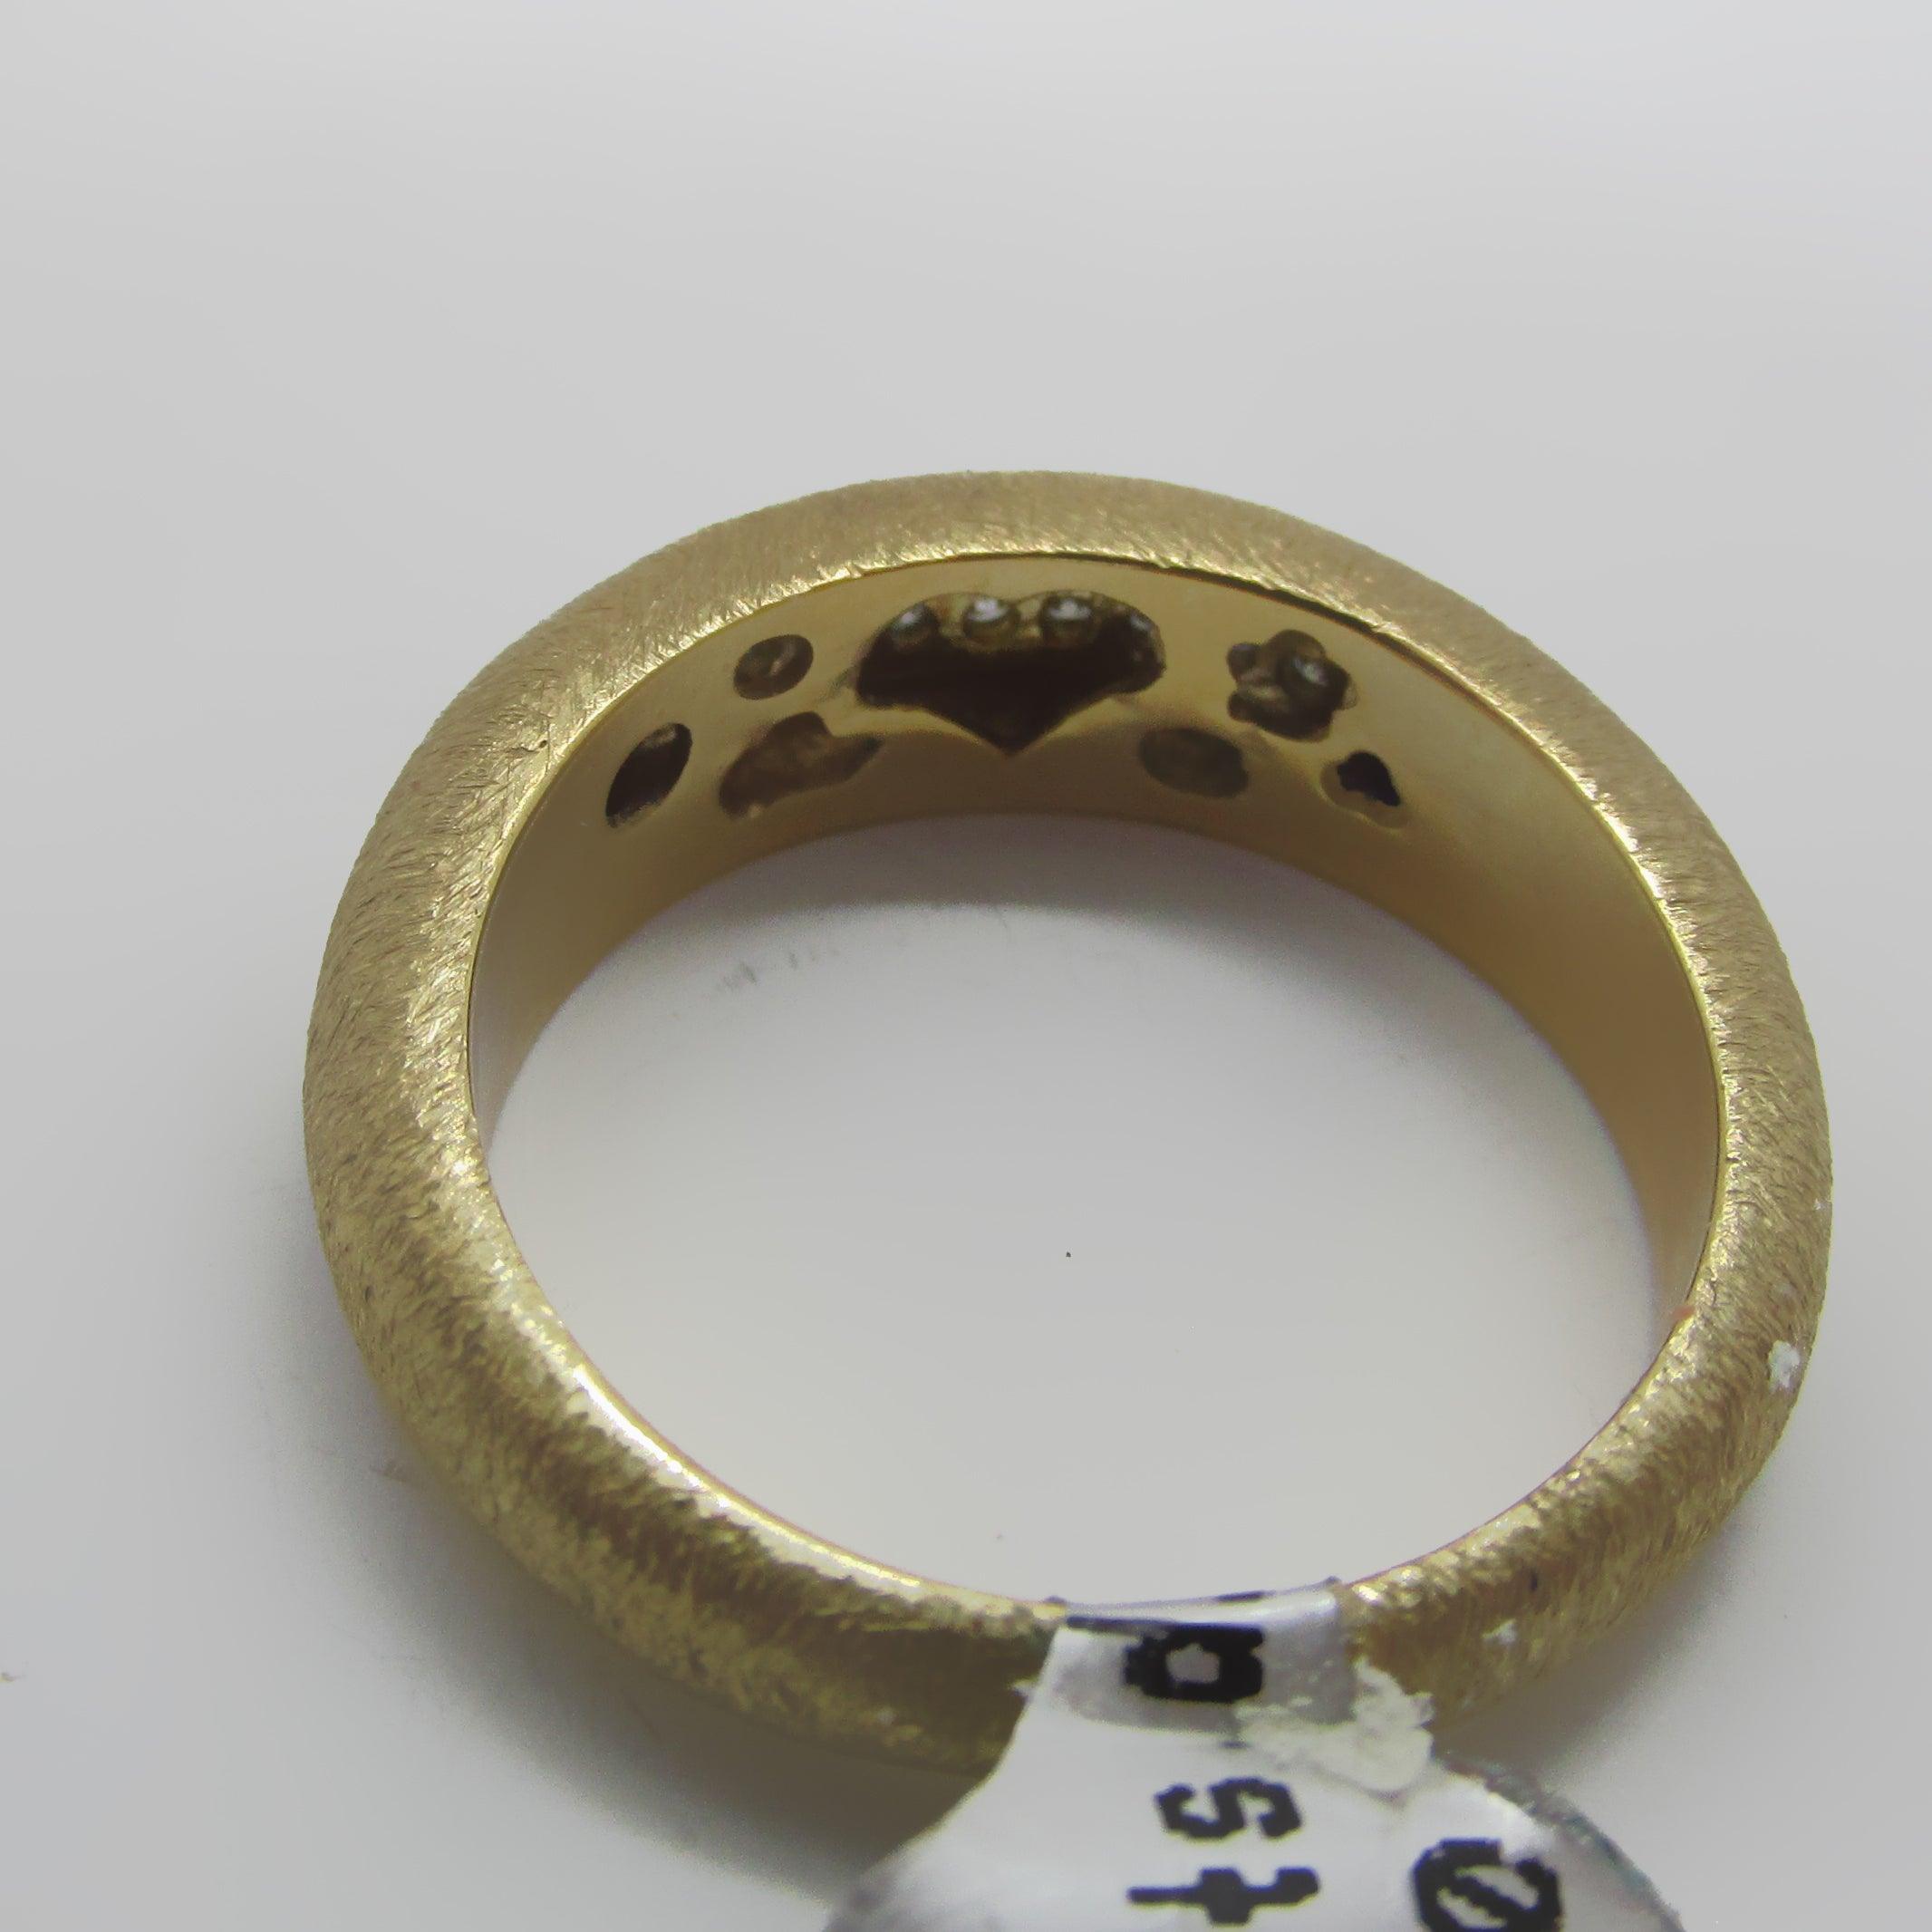 Textured Gold Band With Diamonds - Thenetjeweler